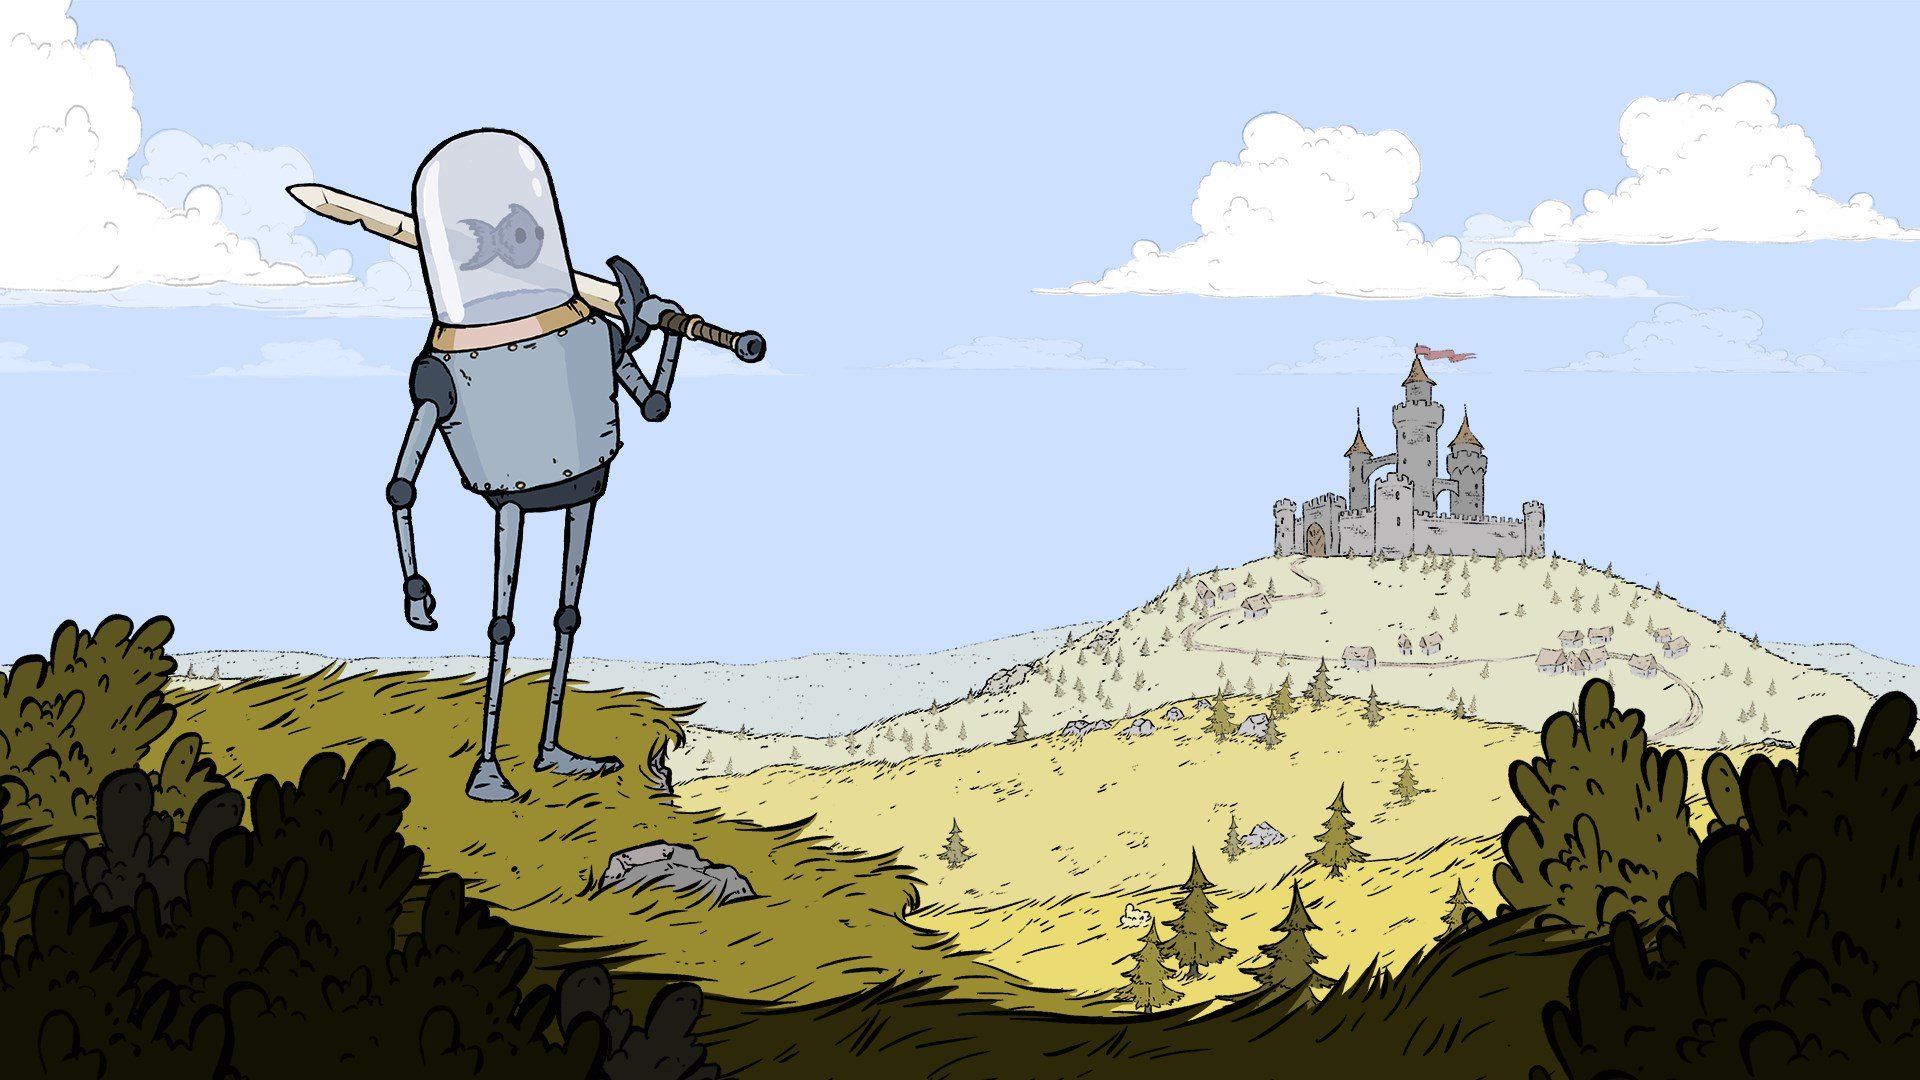 Feudal Alloy cover image